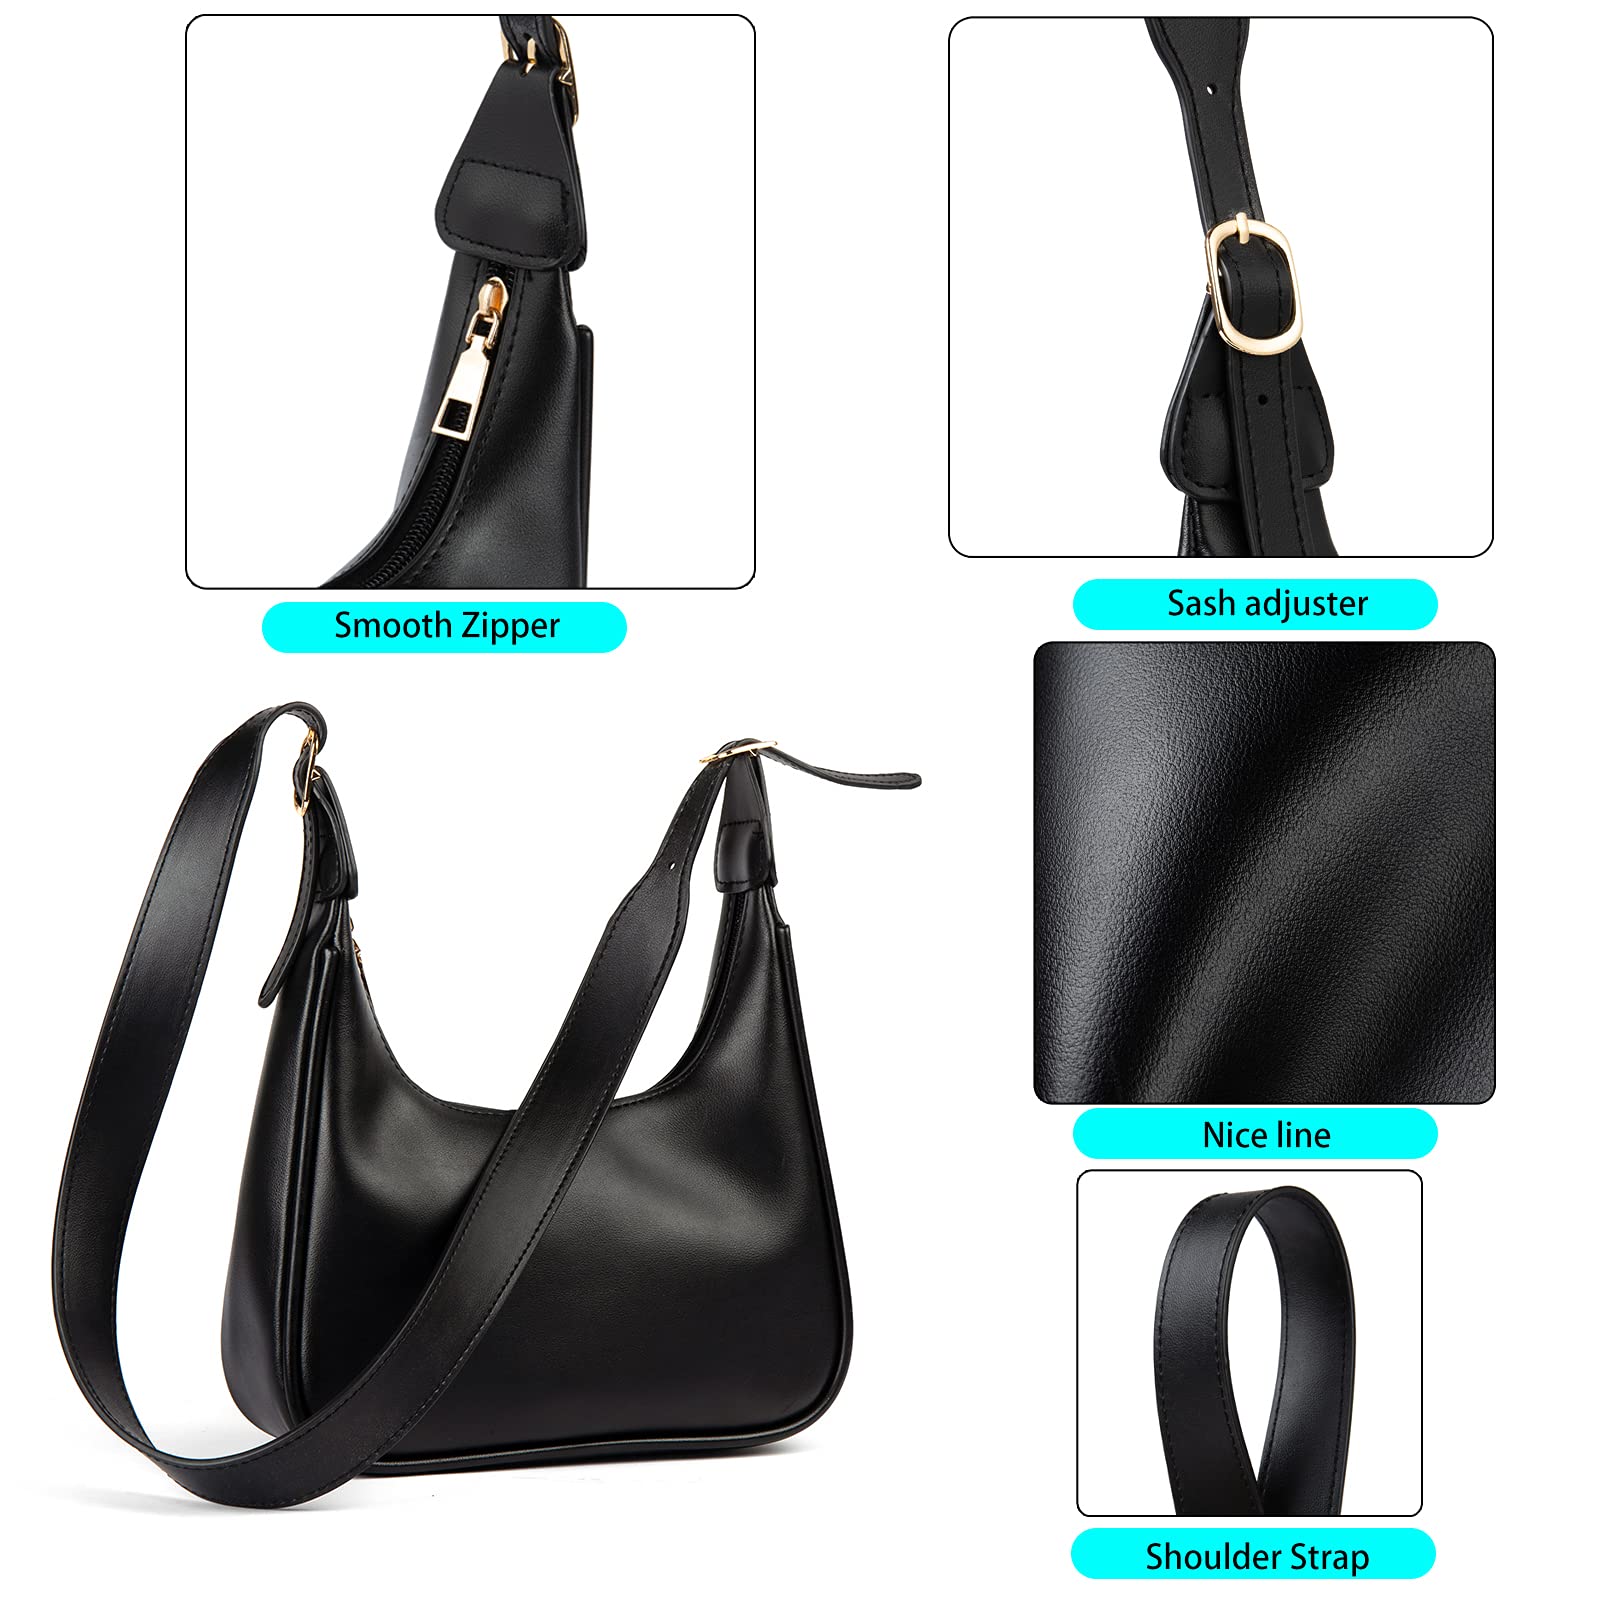 BABABA Retro Classic Half Round Messengerbag Shoulderbag, Zipper Open And Close, Suitable For Women